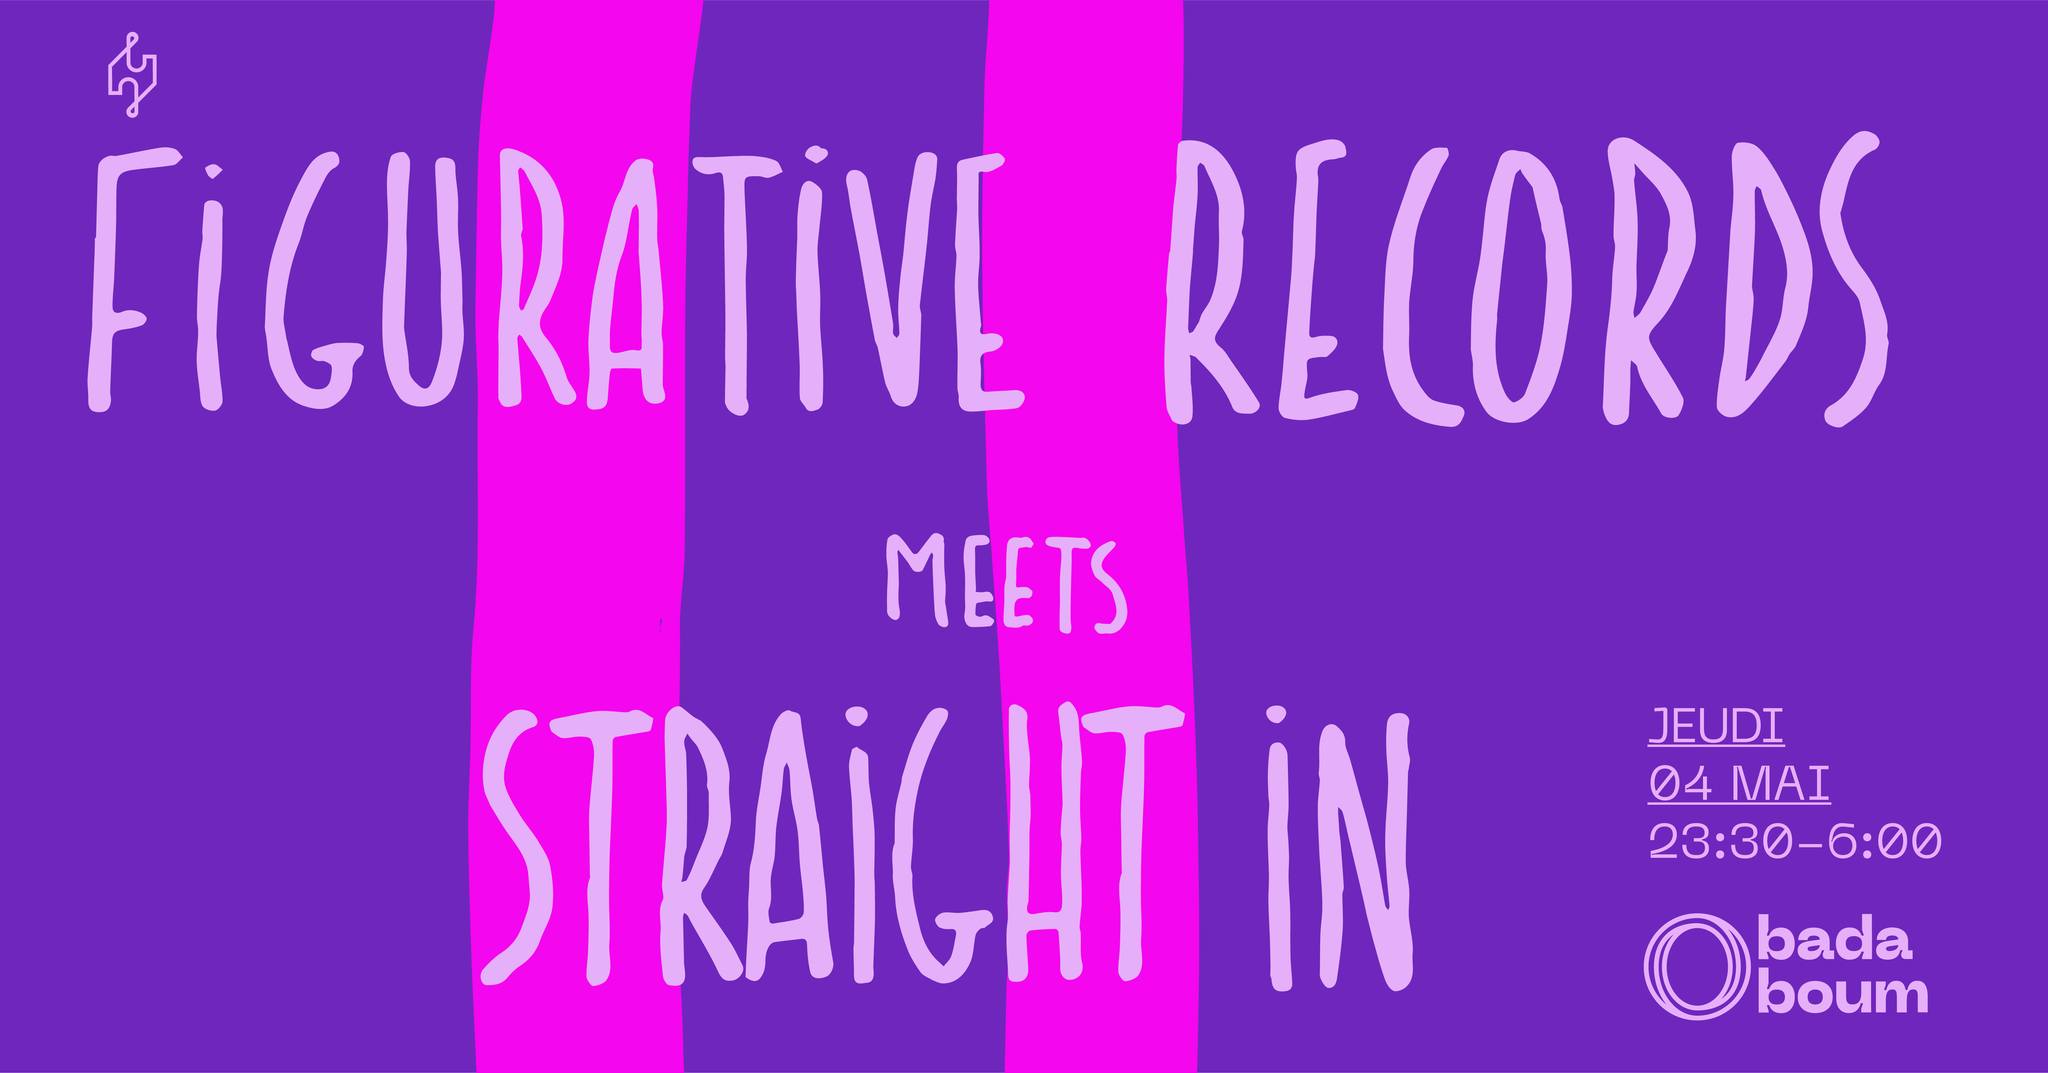 Club — Figurative Records meets Straight In